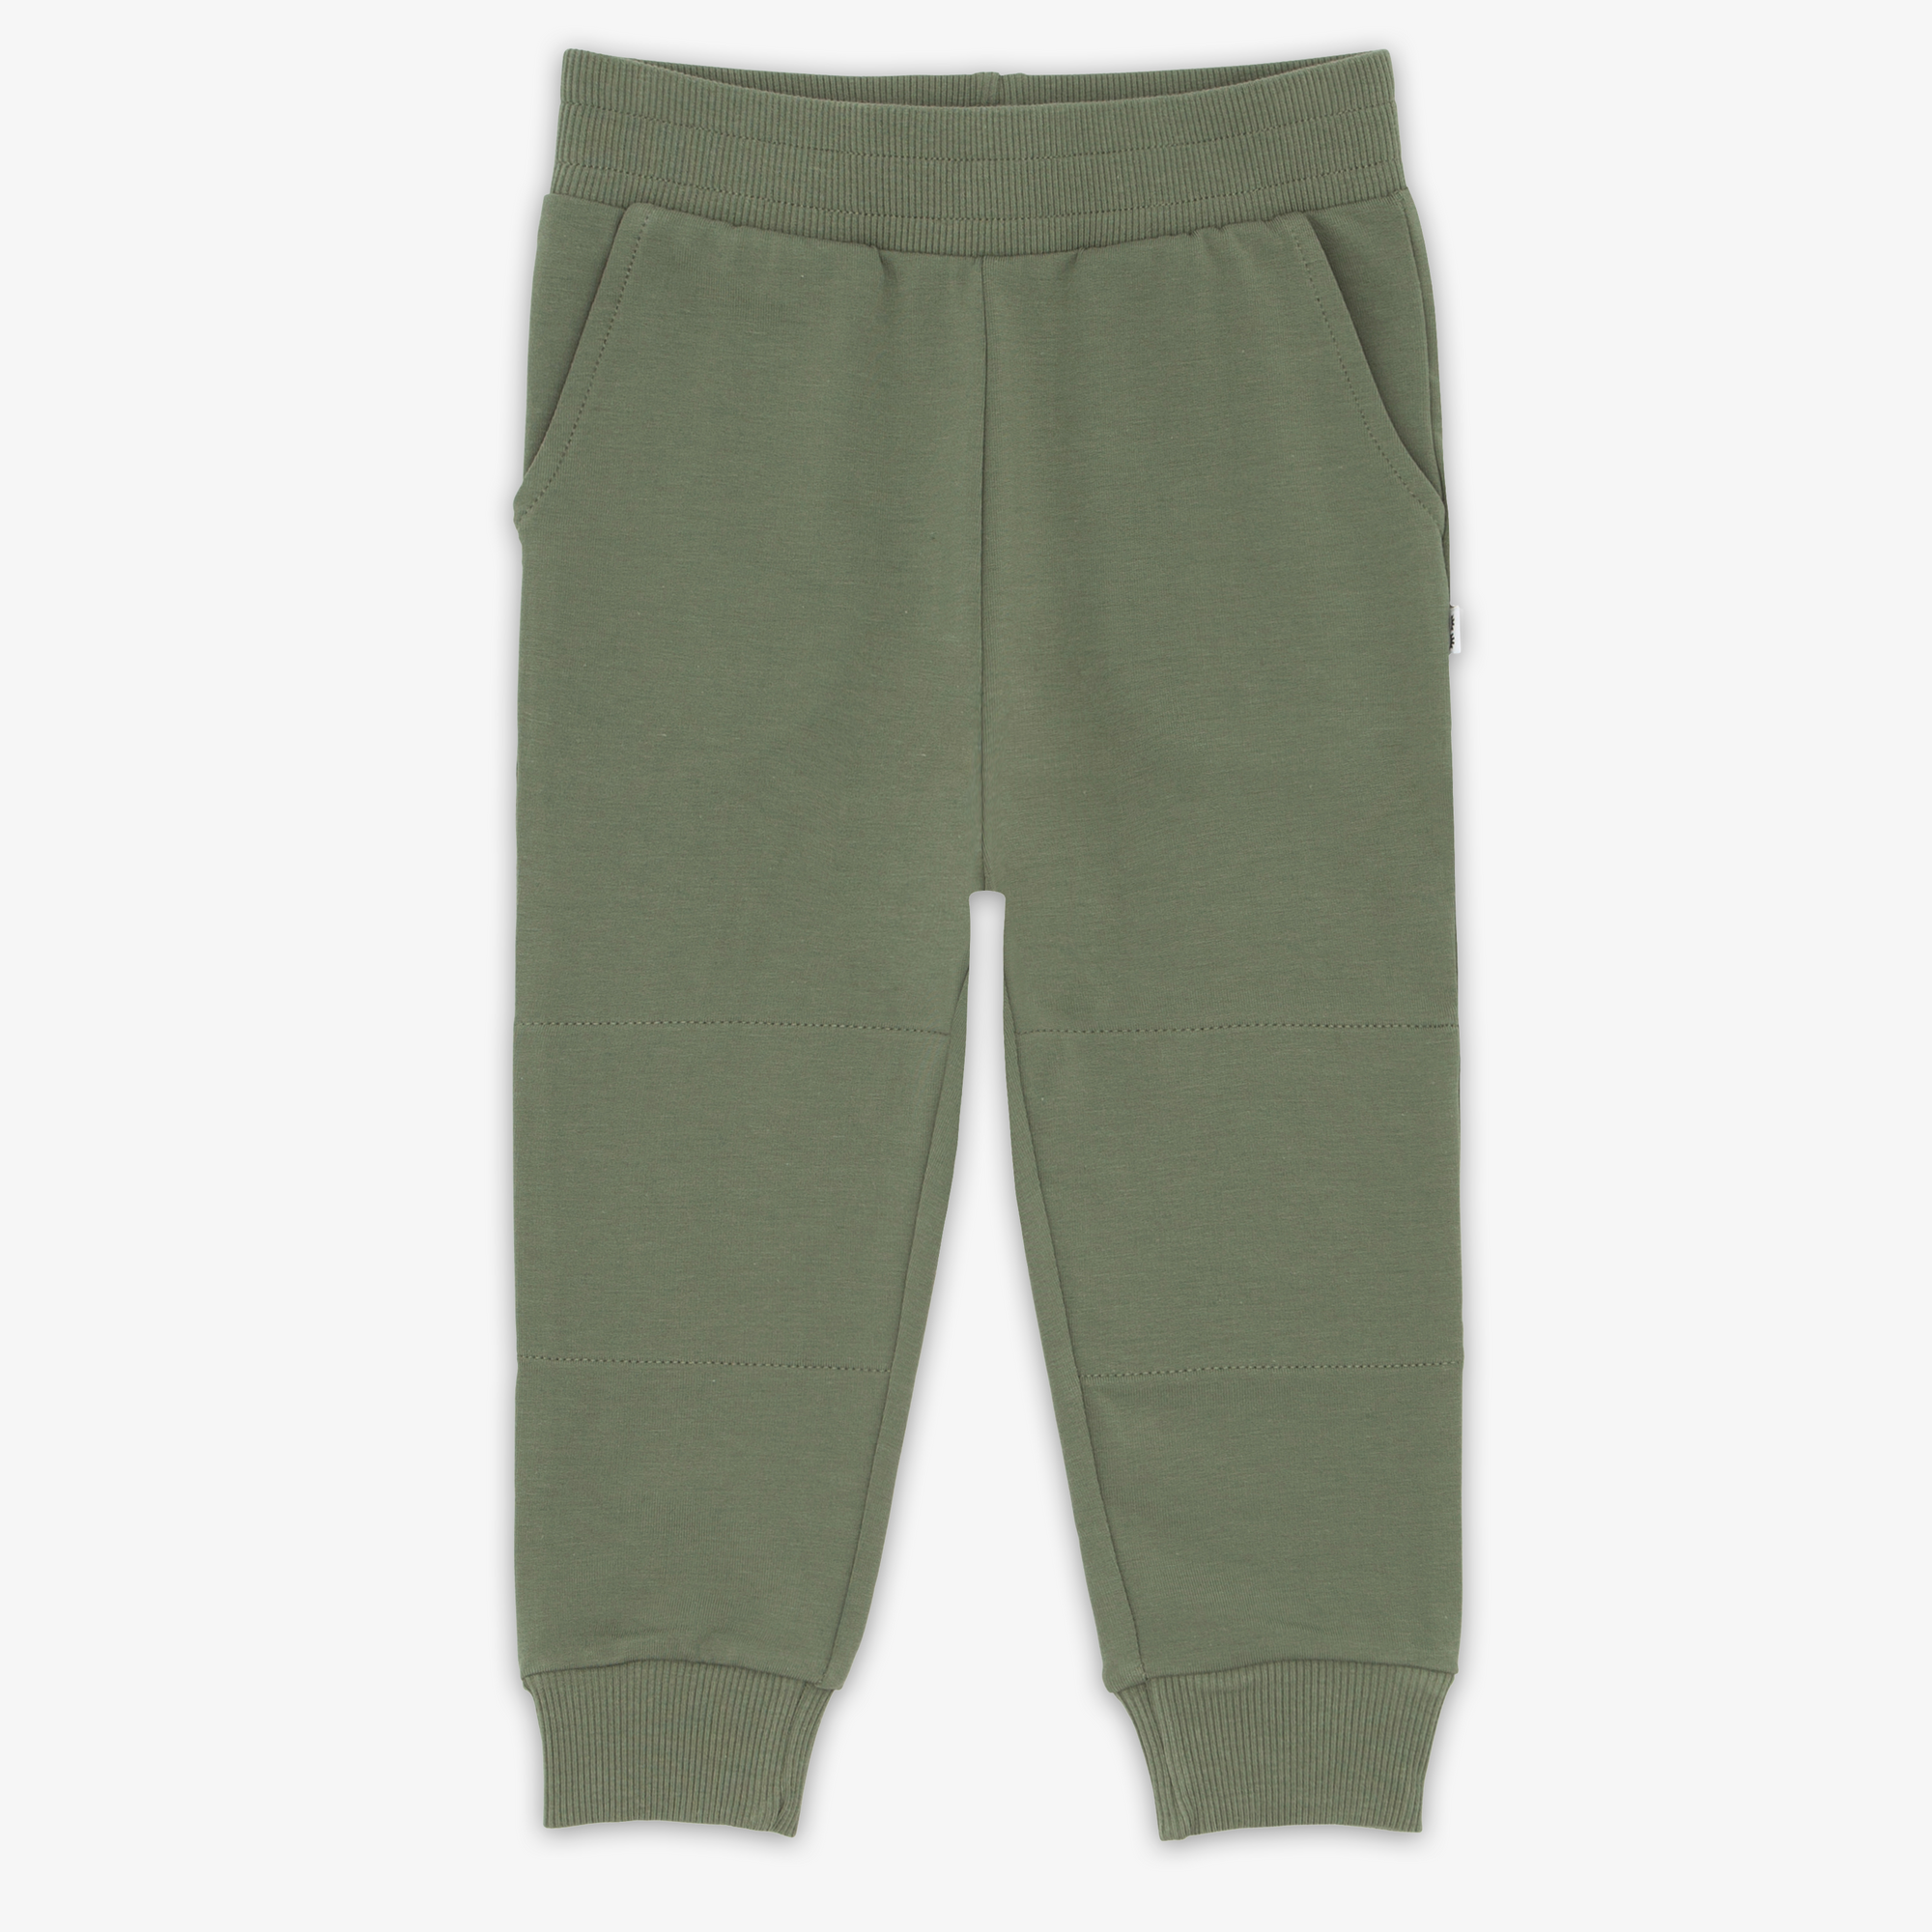 Flat lay image of the Moss Jogger